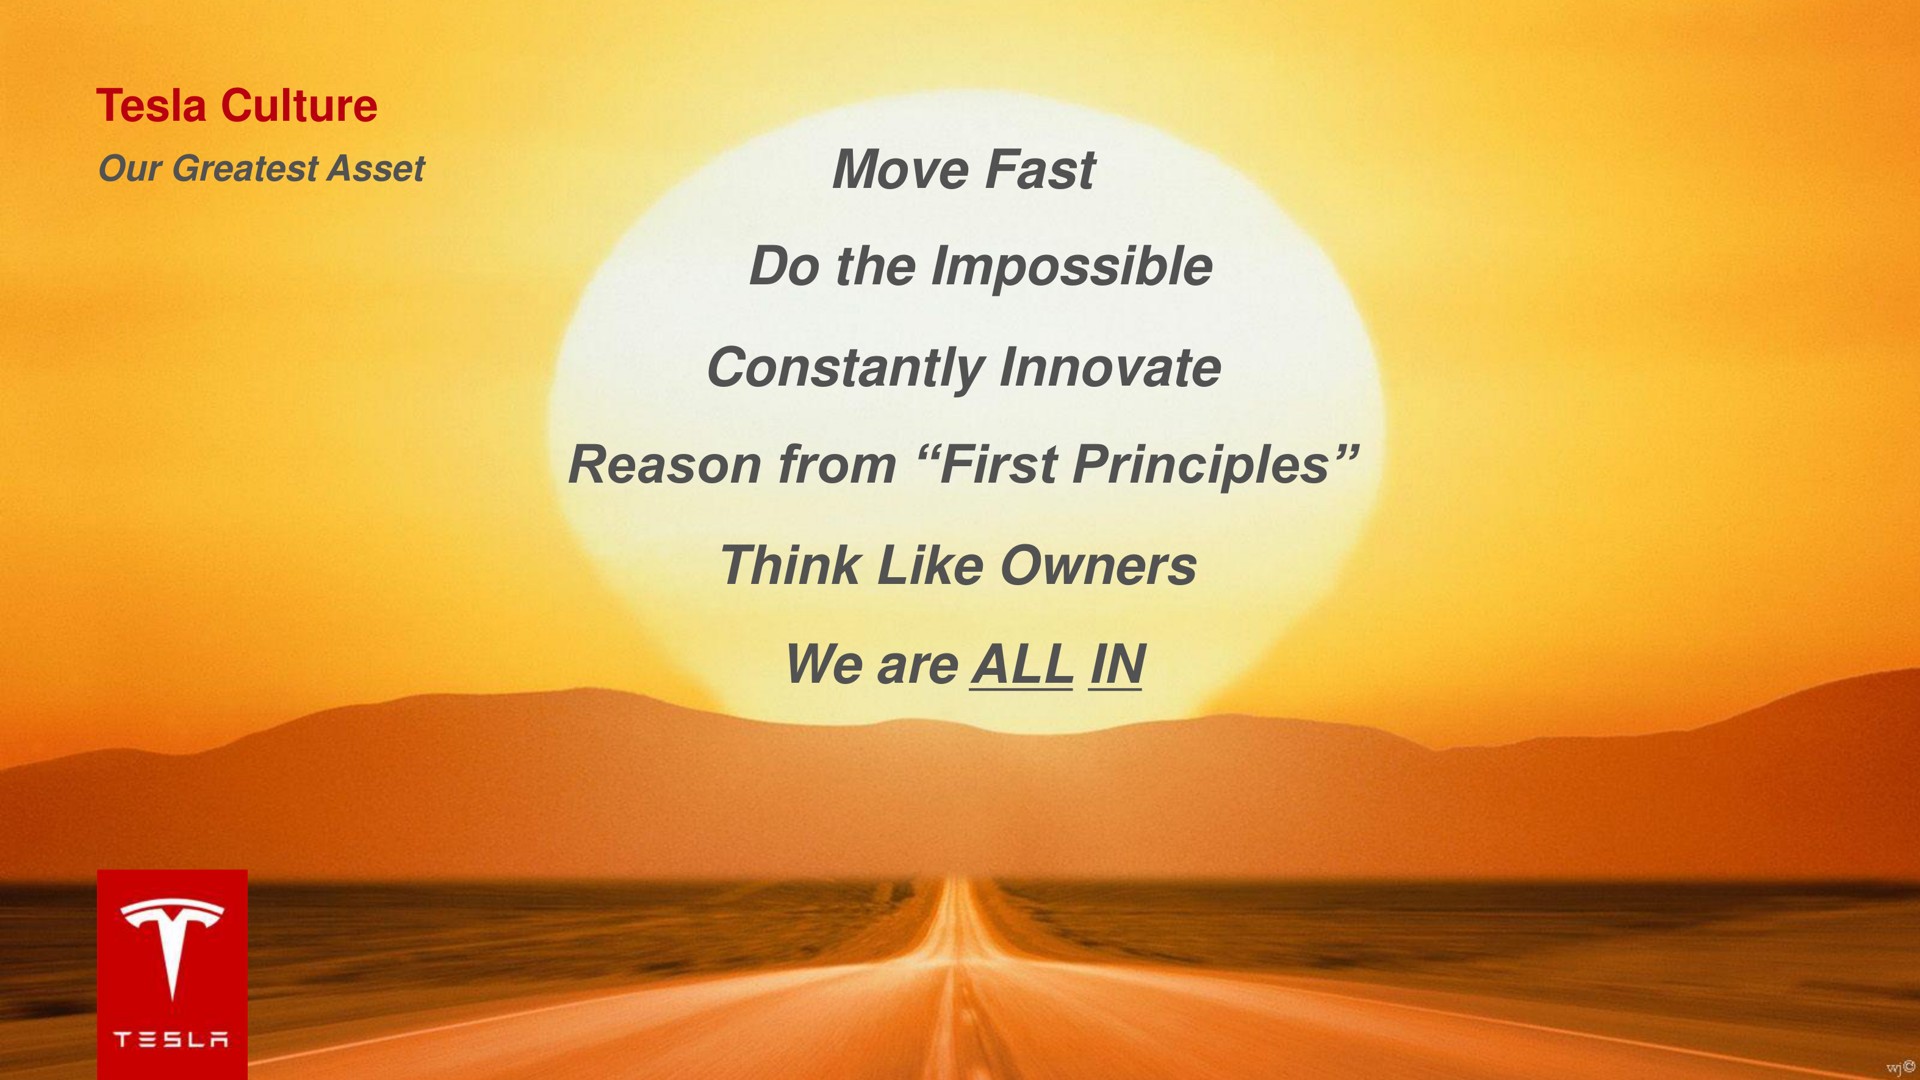 culture move fast do the impossible constantly innovate reason from first principles think like owners we are all in | Tesla